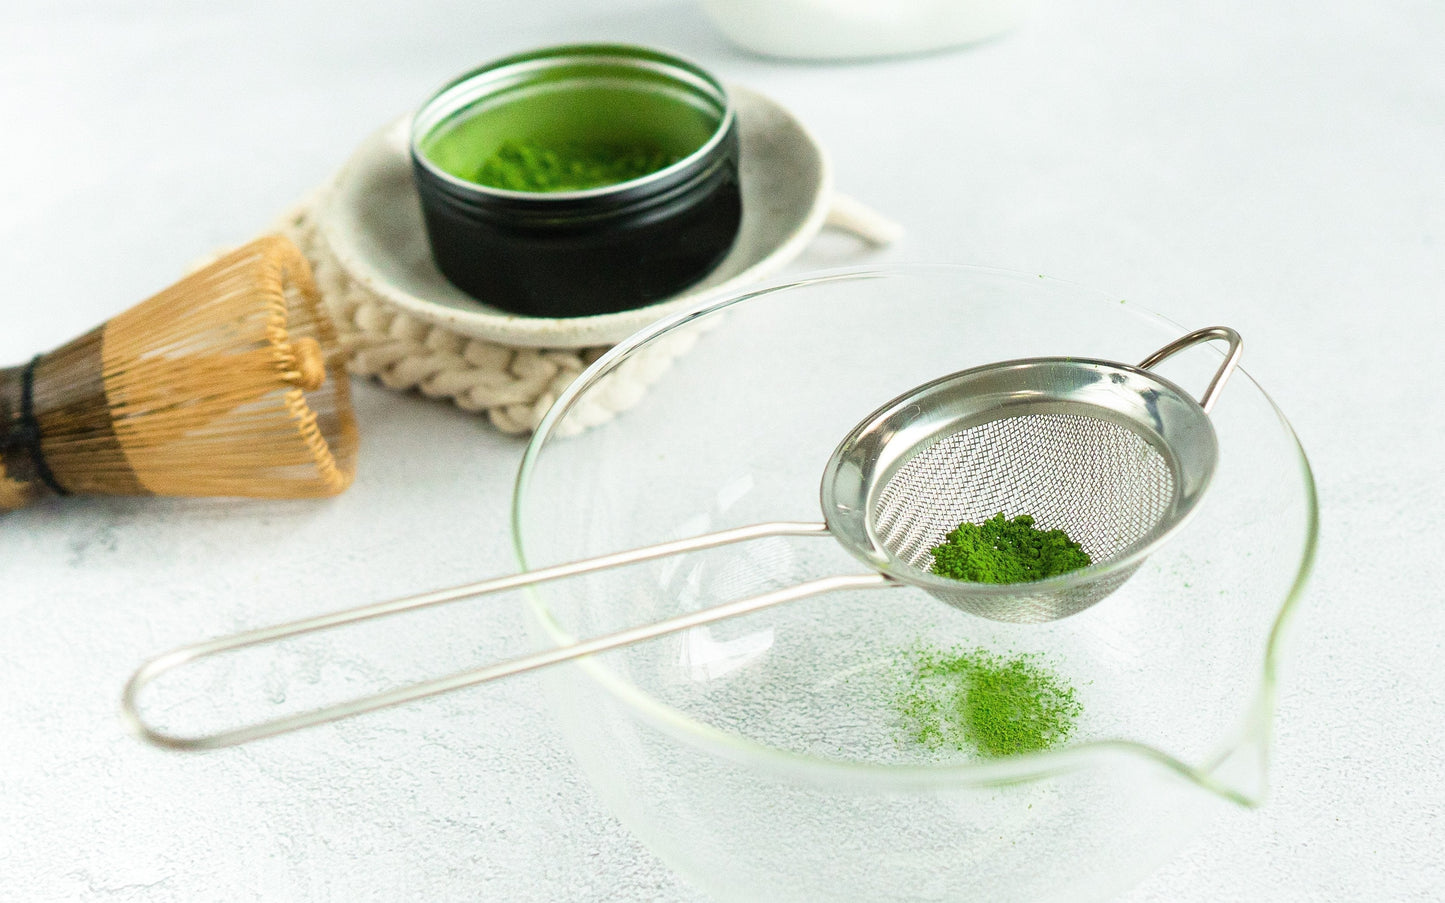 5 Best Matcha Sets in 2024 — Best Matcha Sets for Beginners